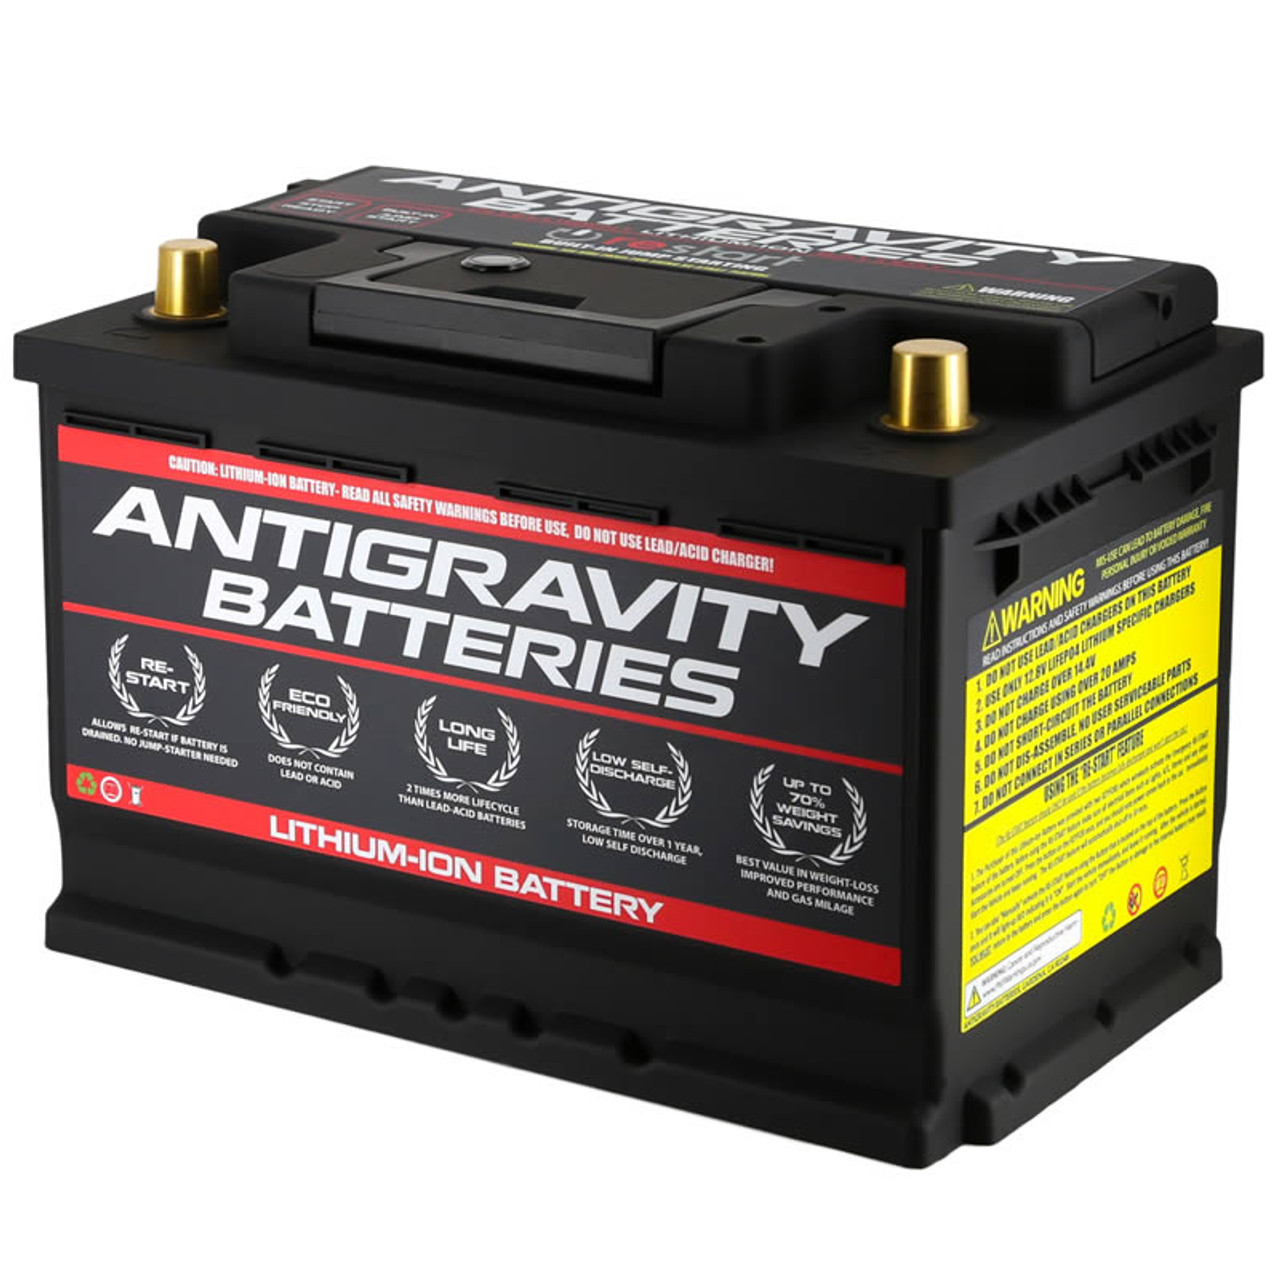 Only Read If You Have 12v Battery Issues..